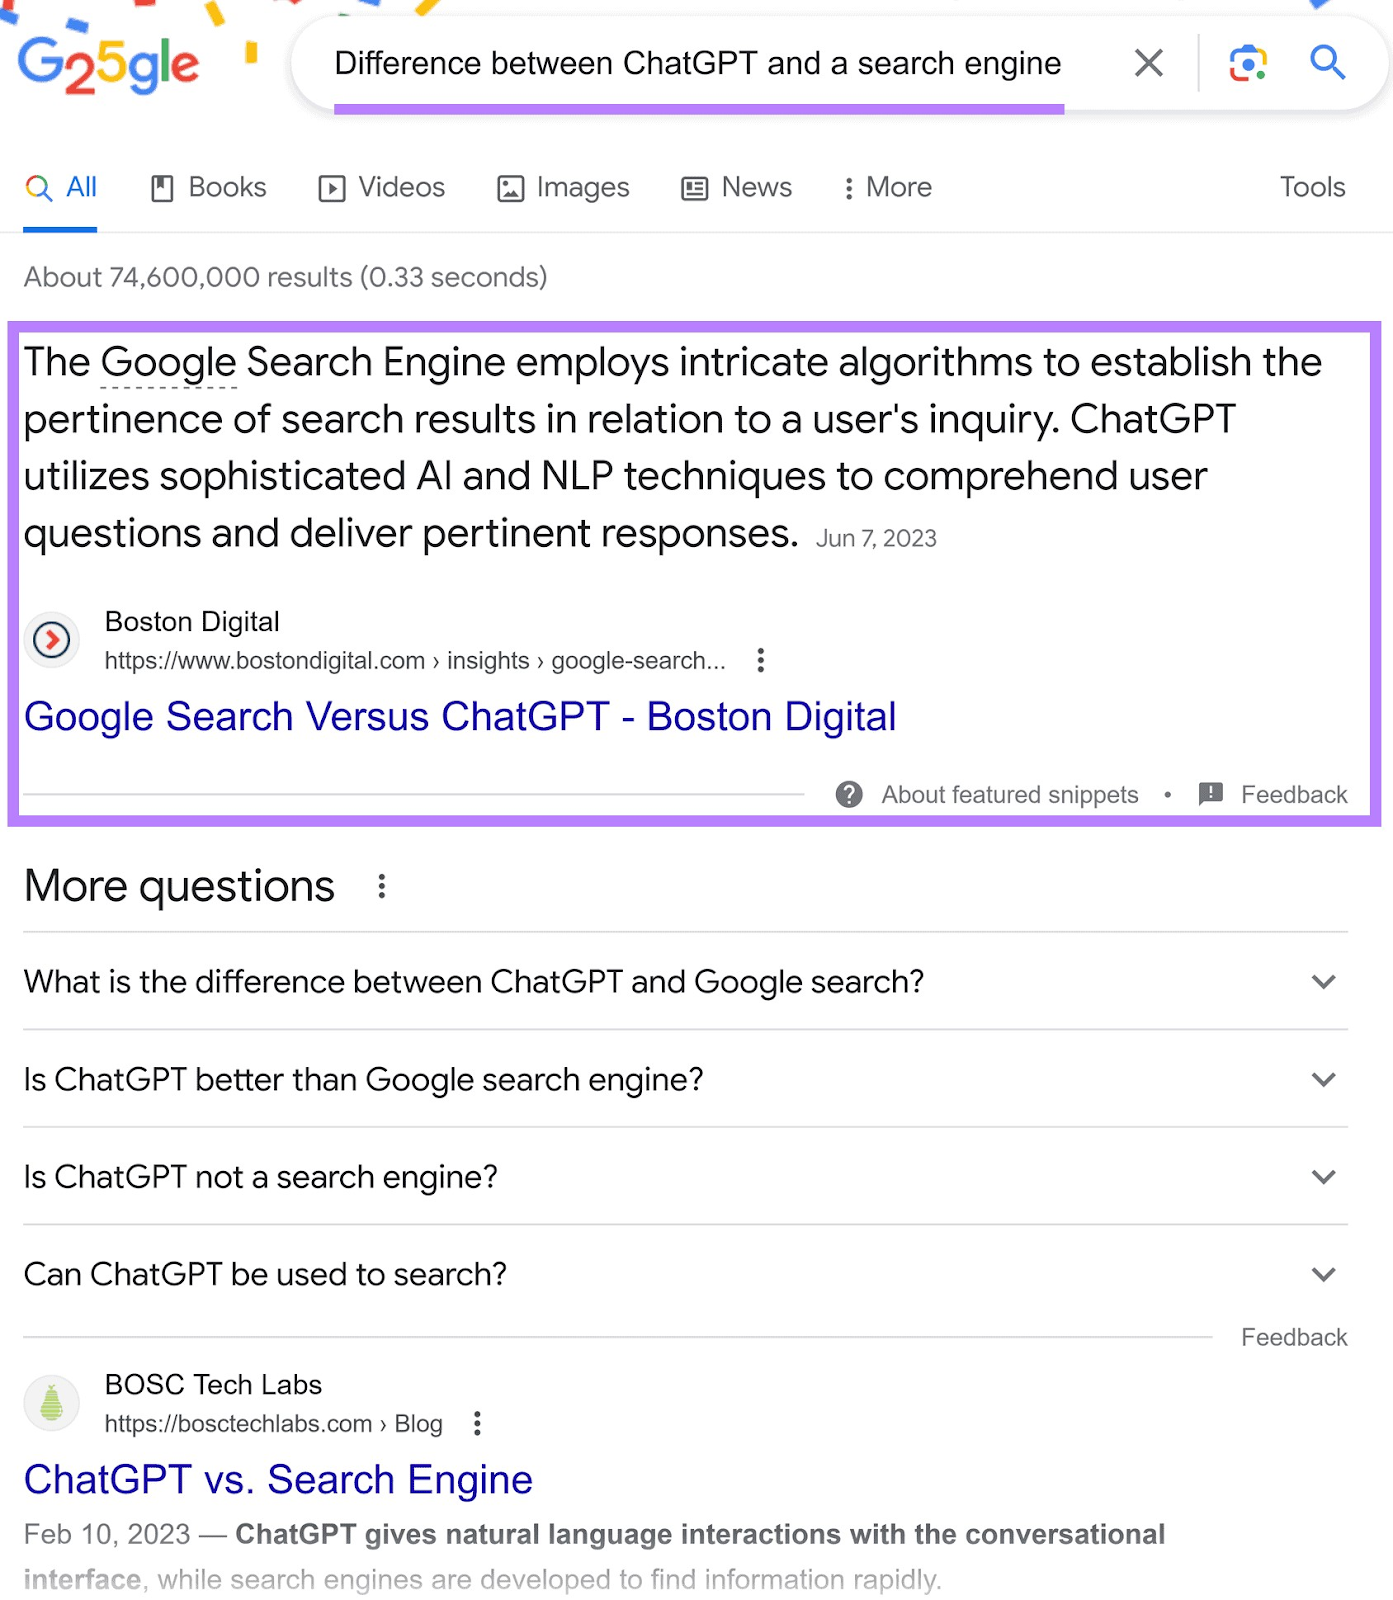 Google results for “difference between ChatGPT and a search engine” search